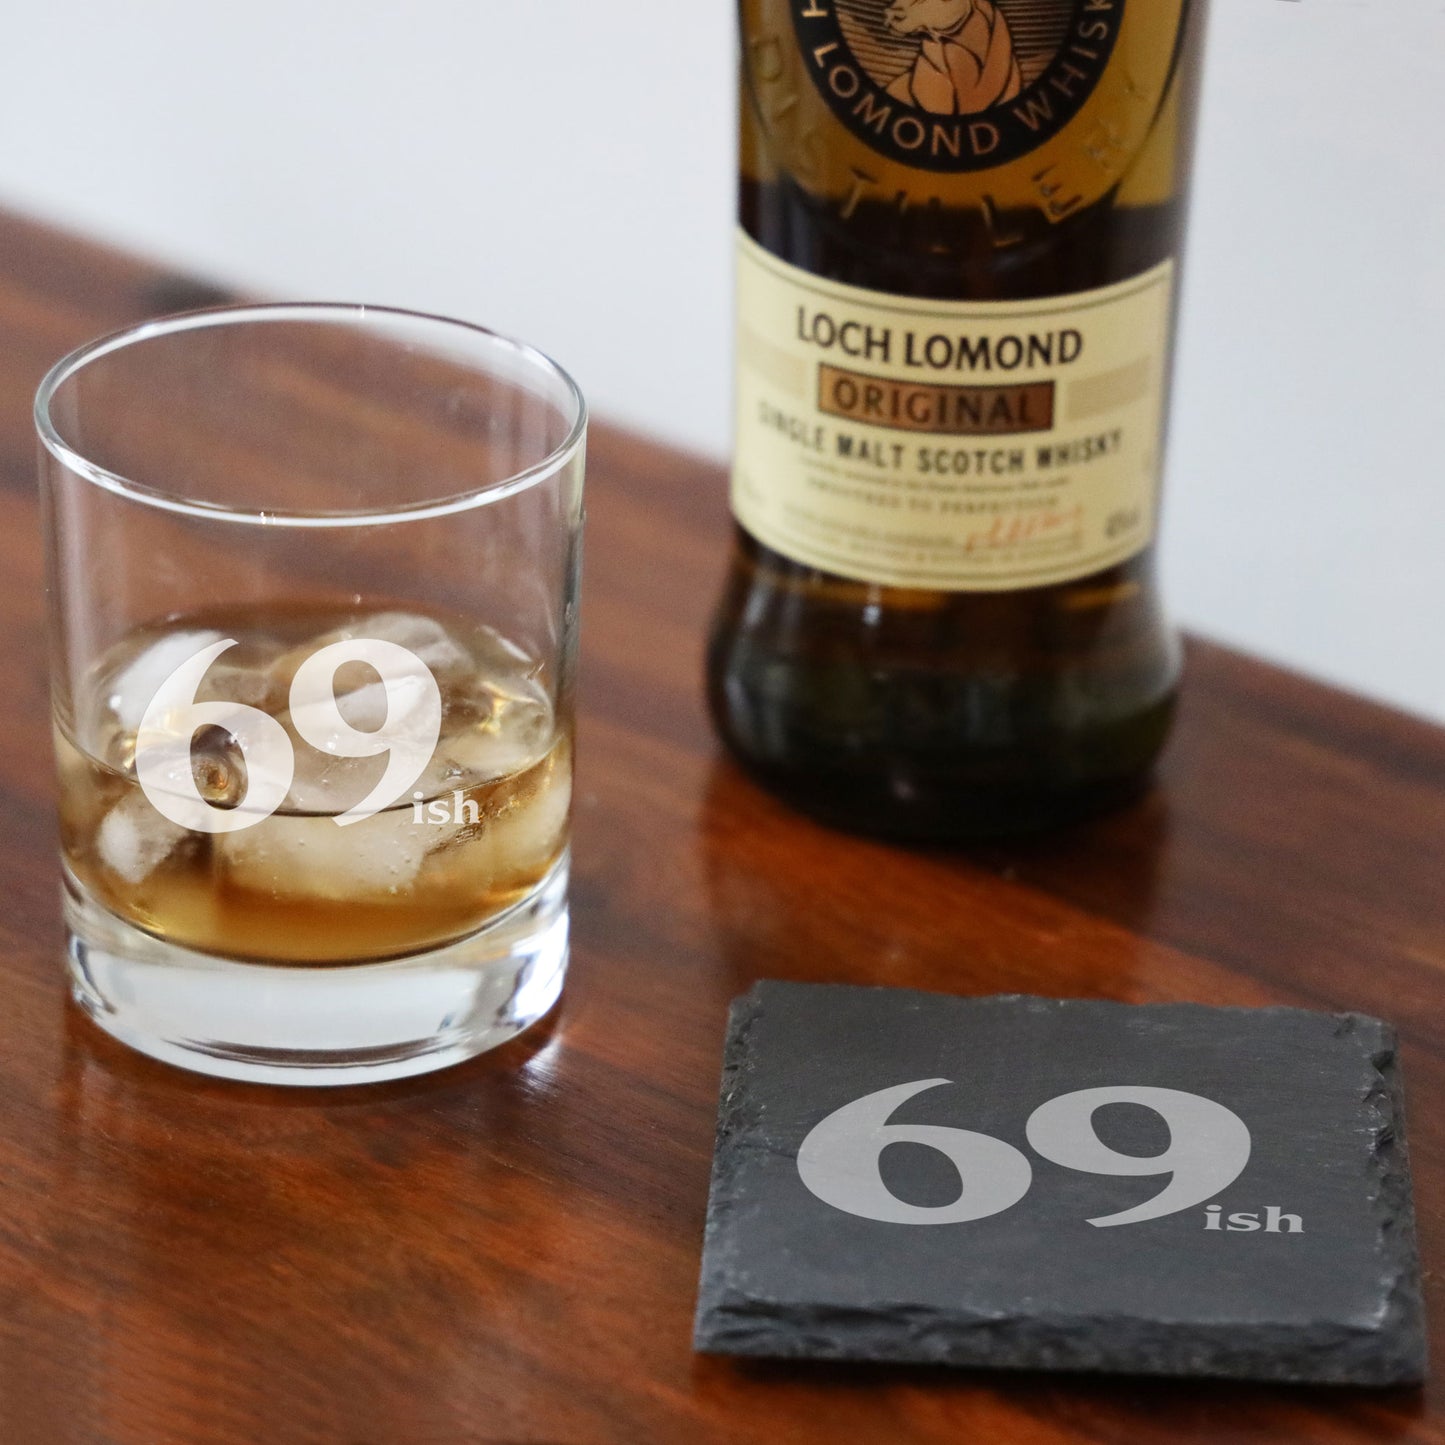 69ish Whisky Glass and/or Coaster Set  - Always Looking Good - Glass & Square Coaster Set  